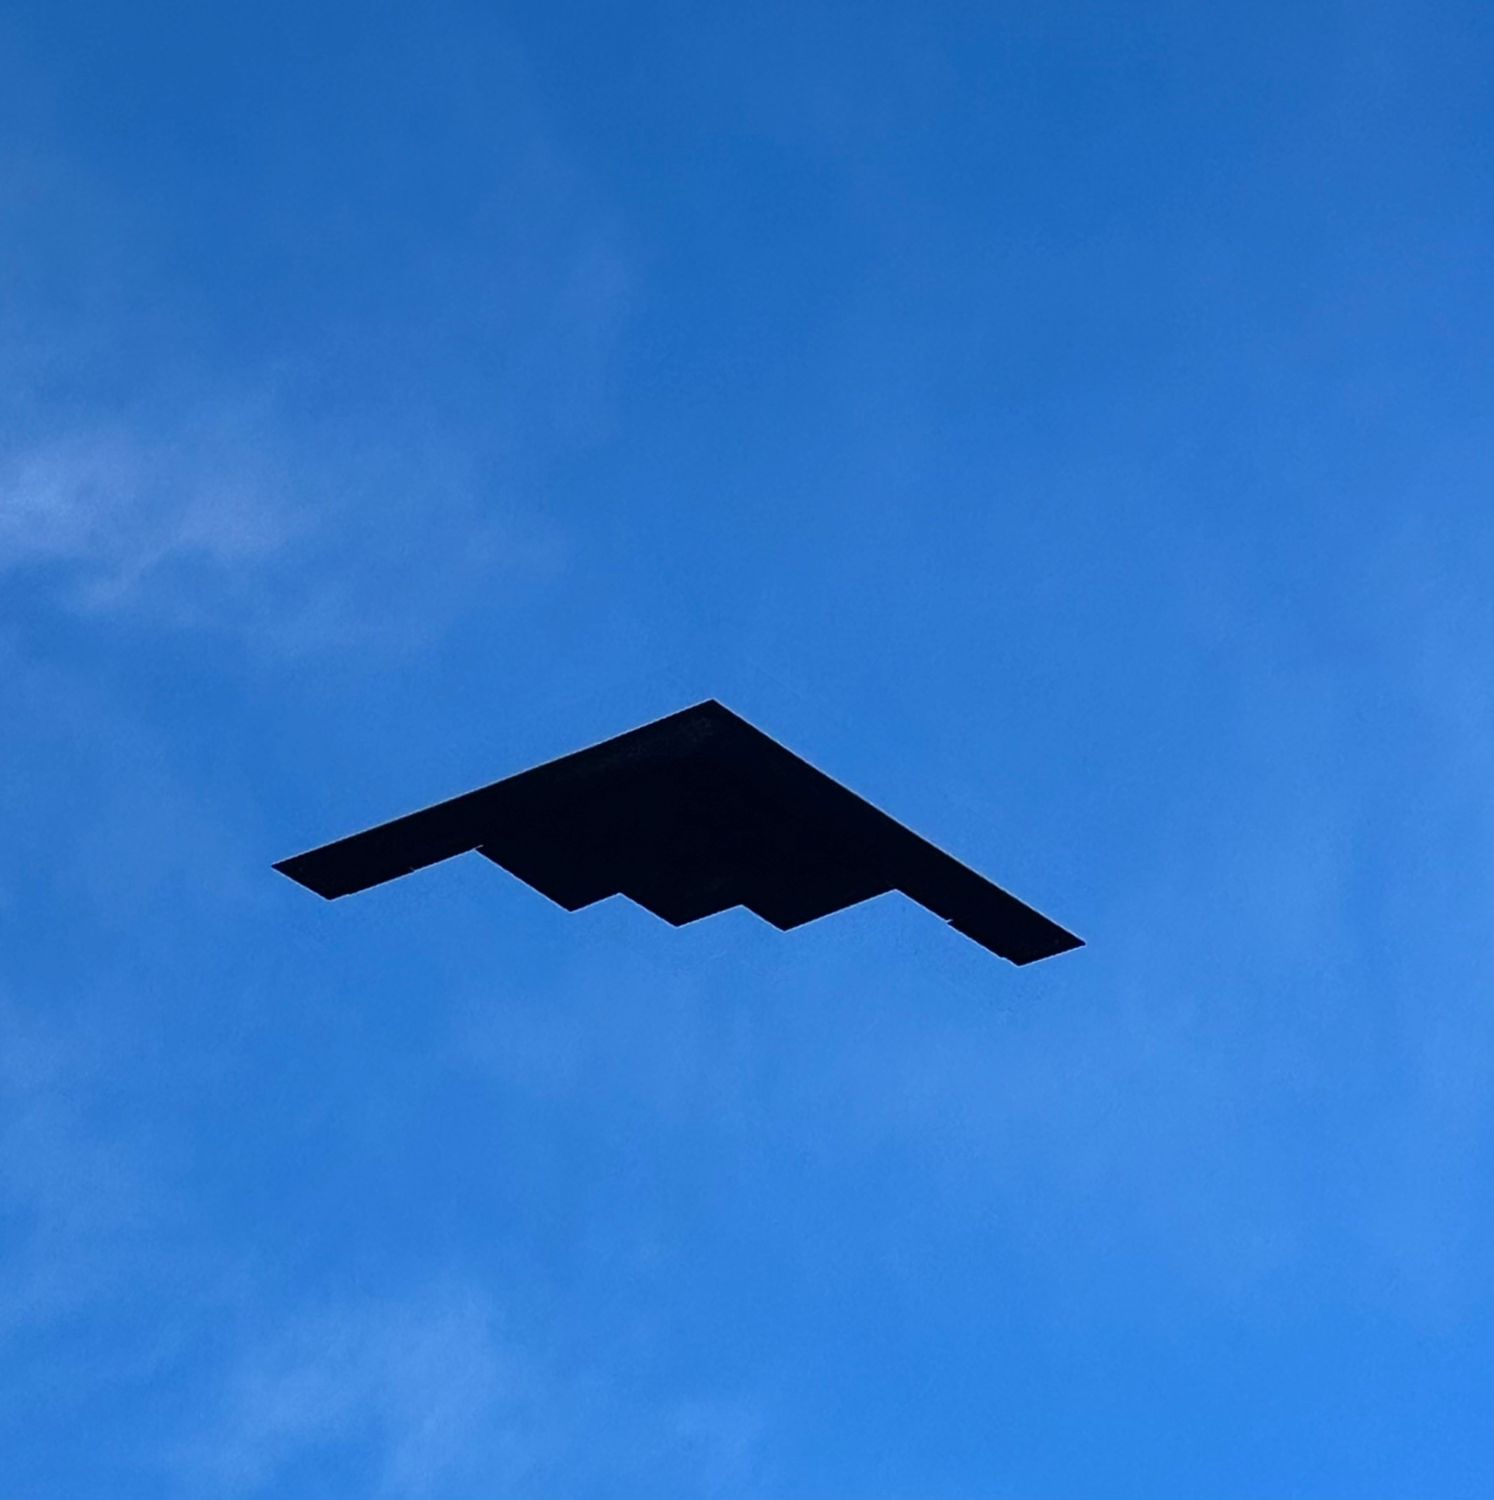 PHOTO: Bill Glazier | The South Pasadenan | A U.S. Air Force B-2 Spirit Stealth bomber flyover, a traditional favorite, opened the 135th running of the Rose Parade in Pasadena.